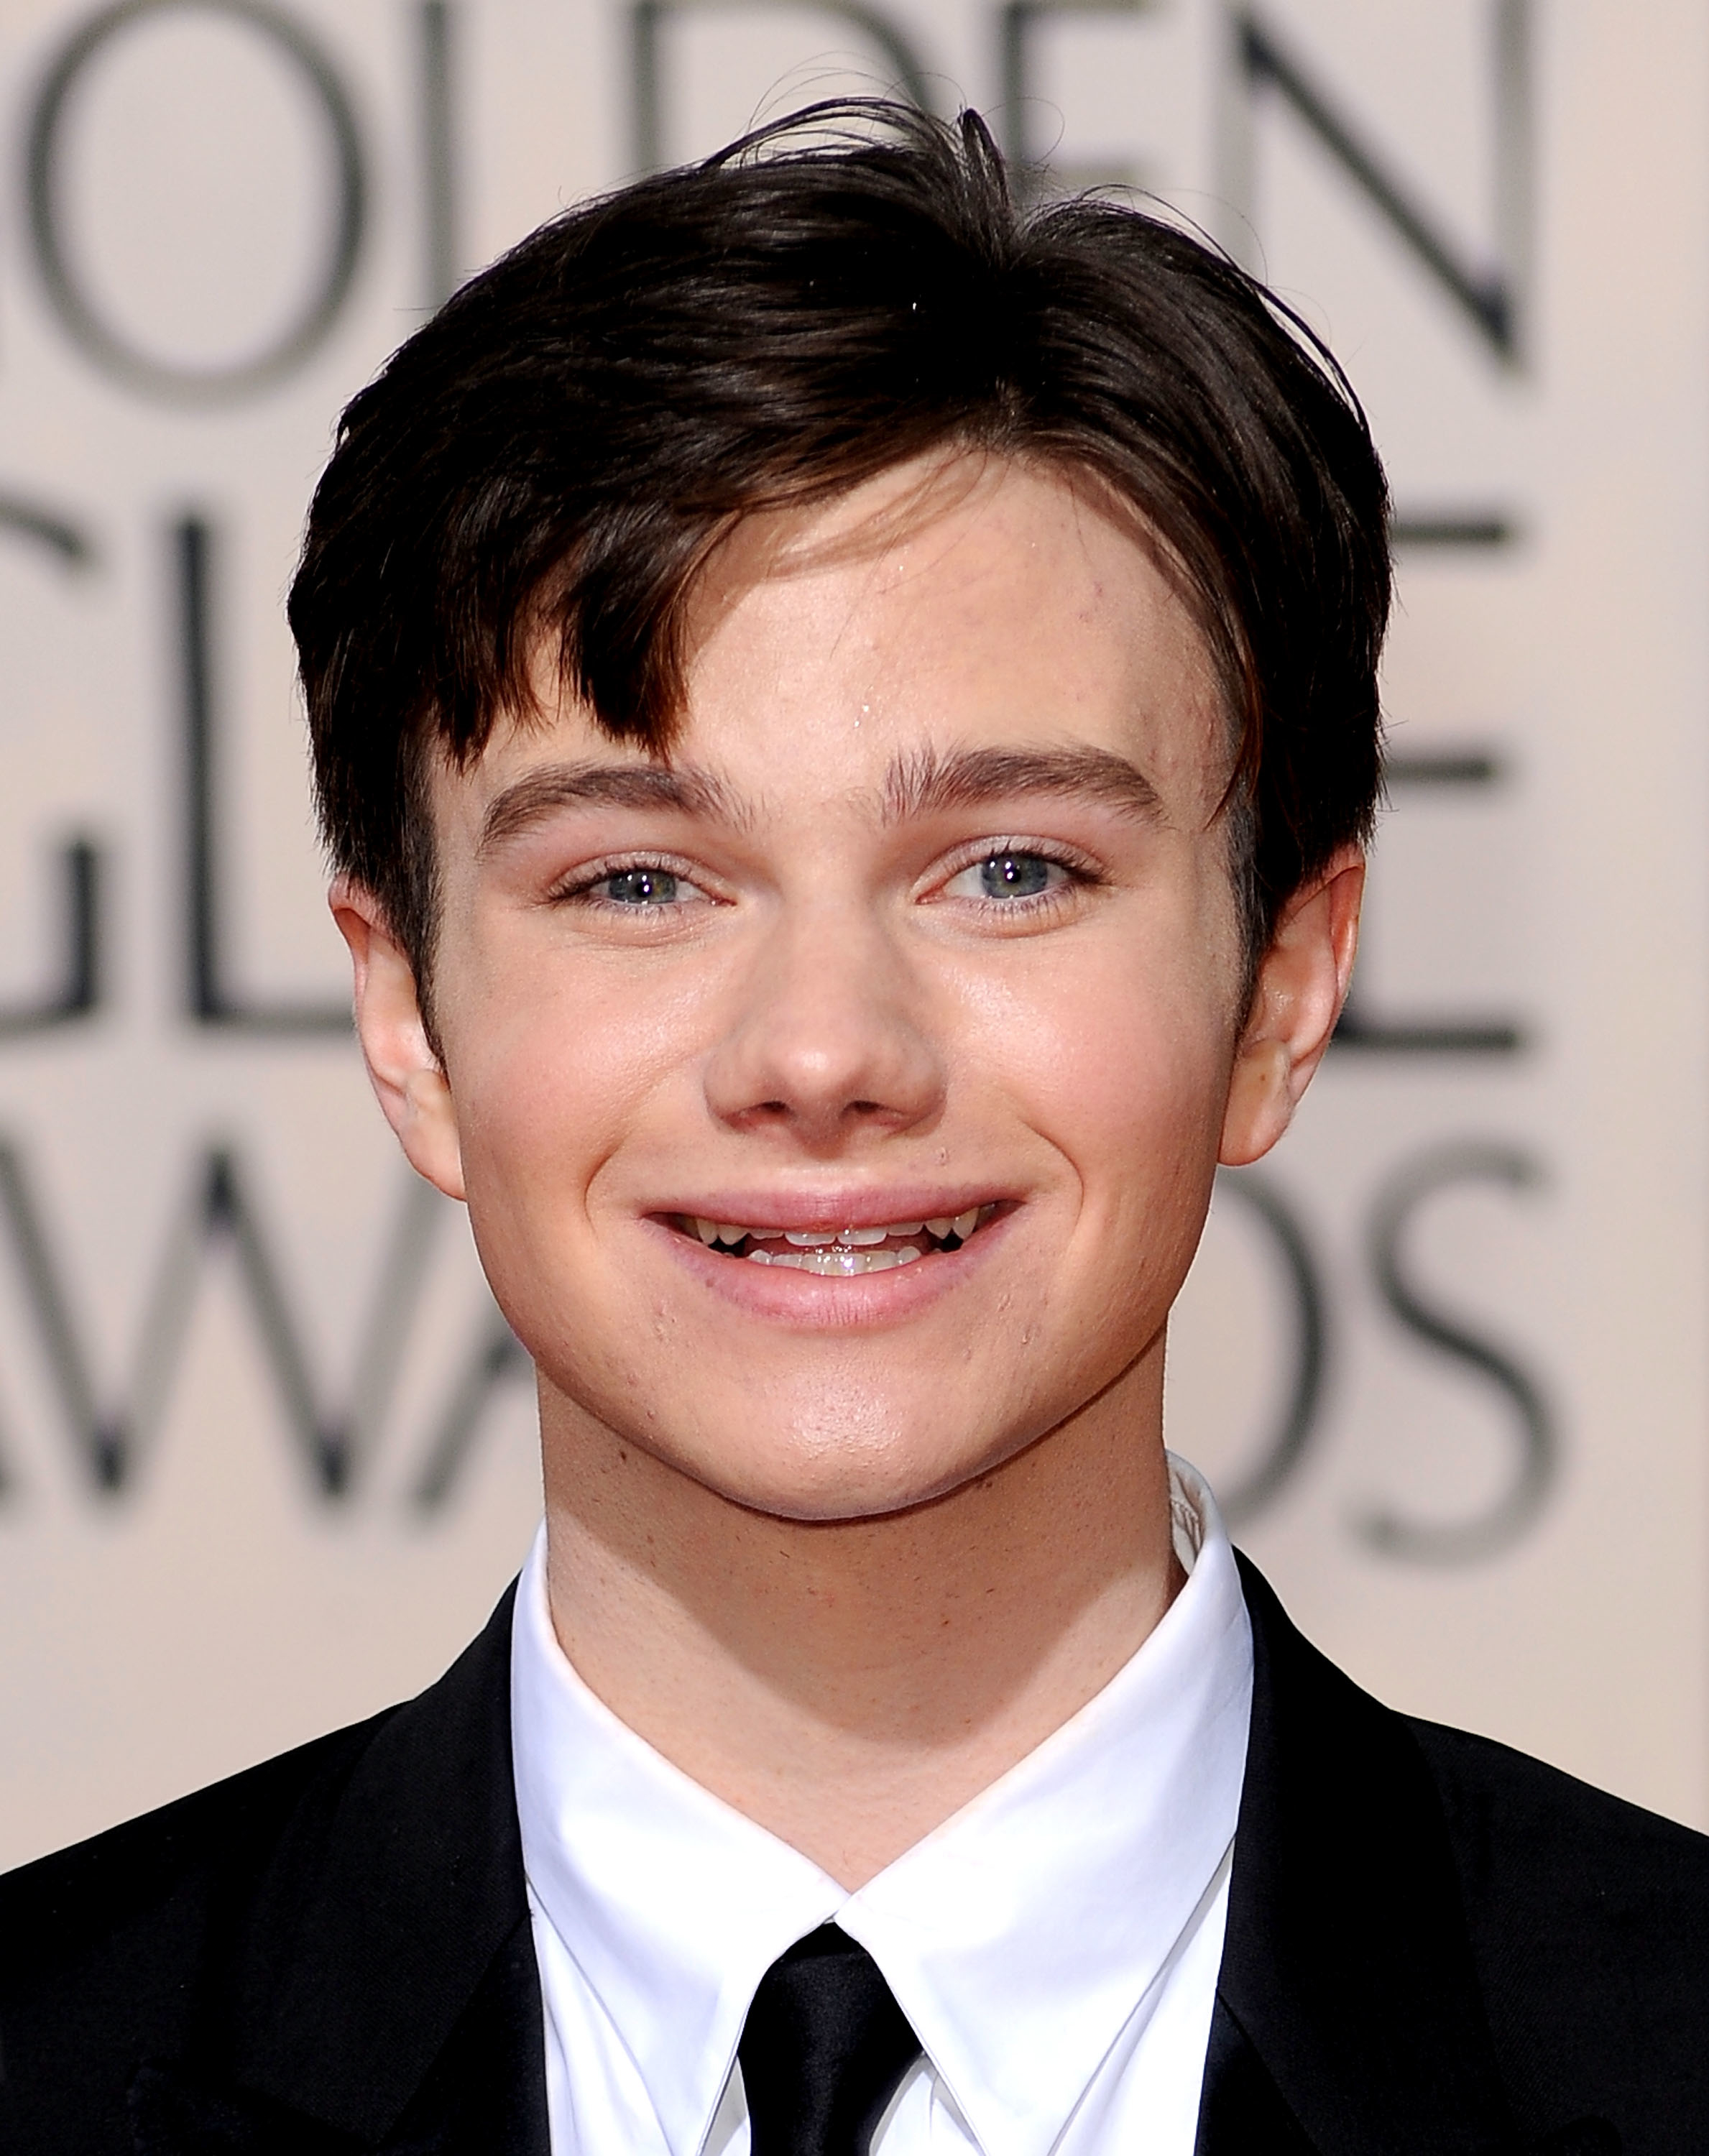 Chris Colfer at the Golden Globe Awards, smiling and dressed in a suit and tie